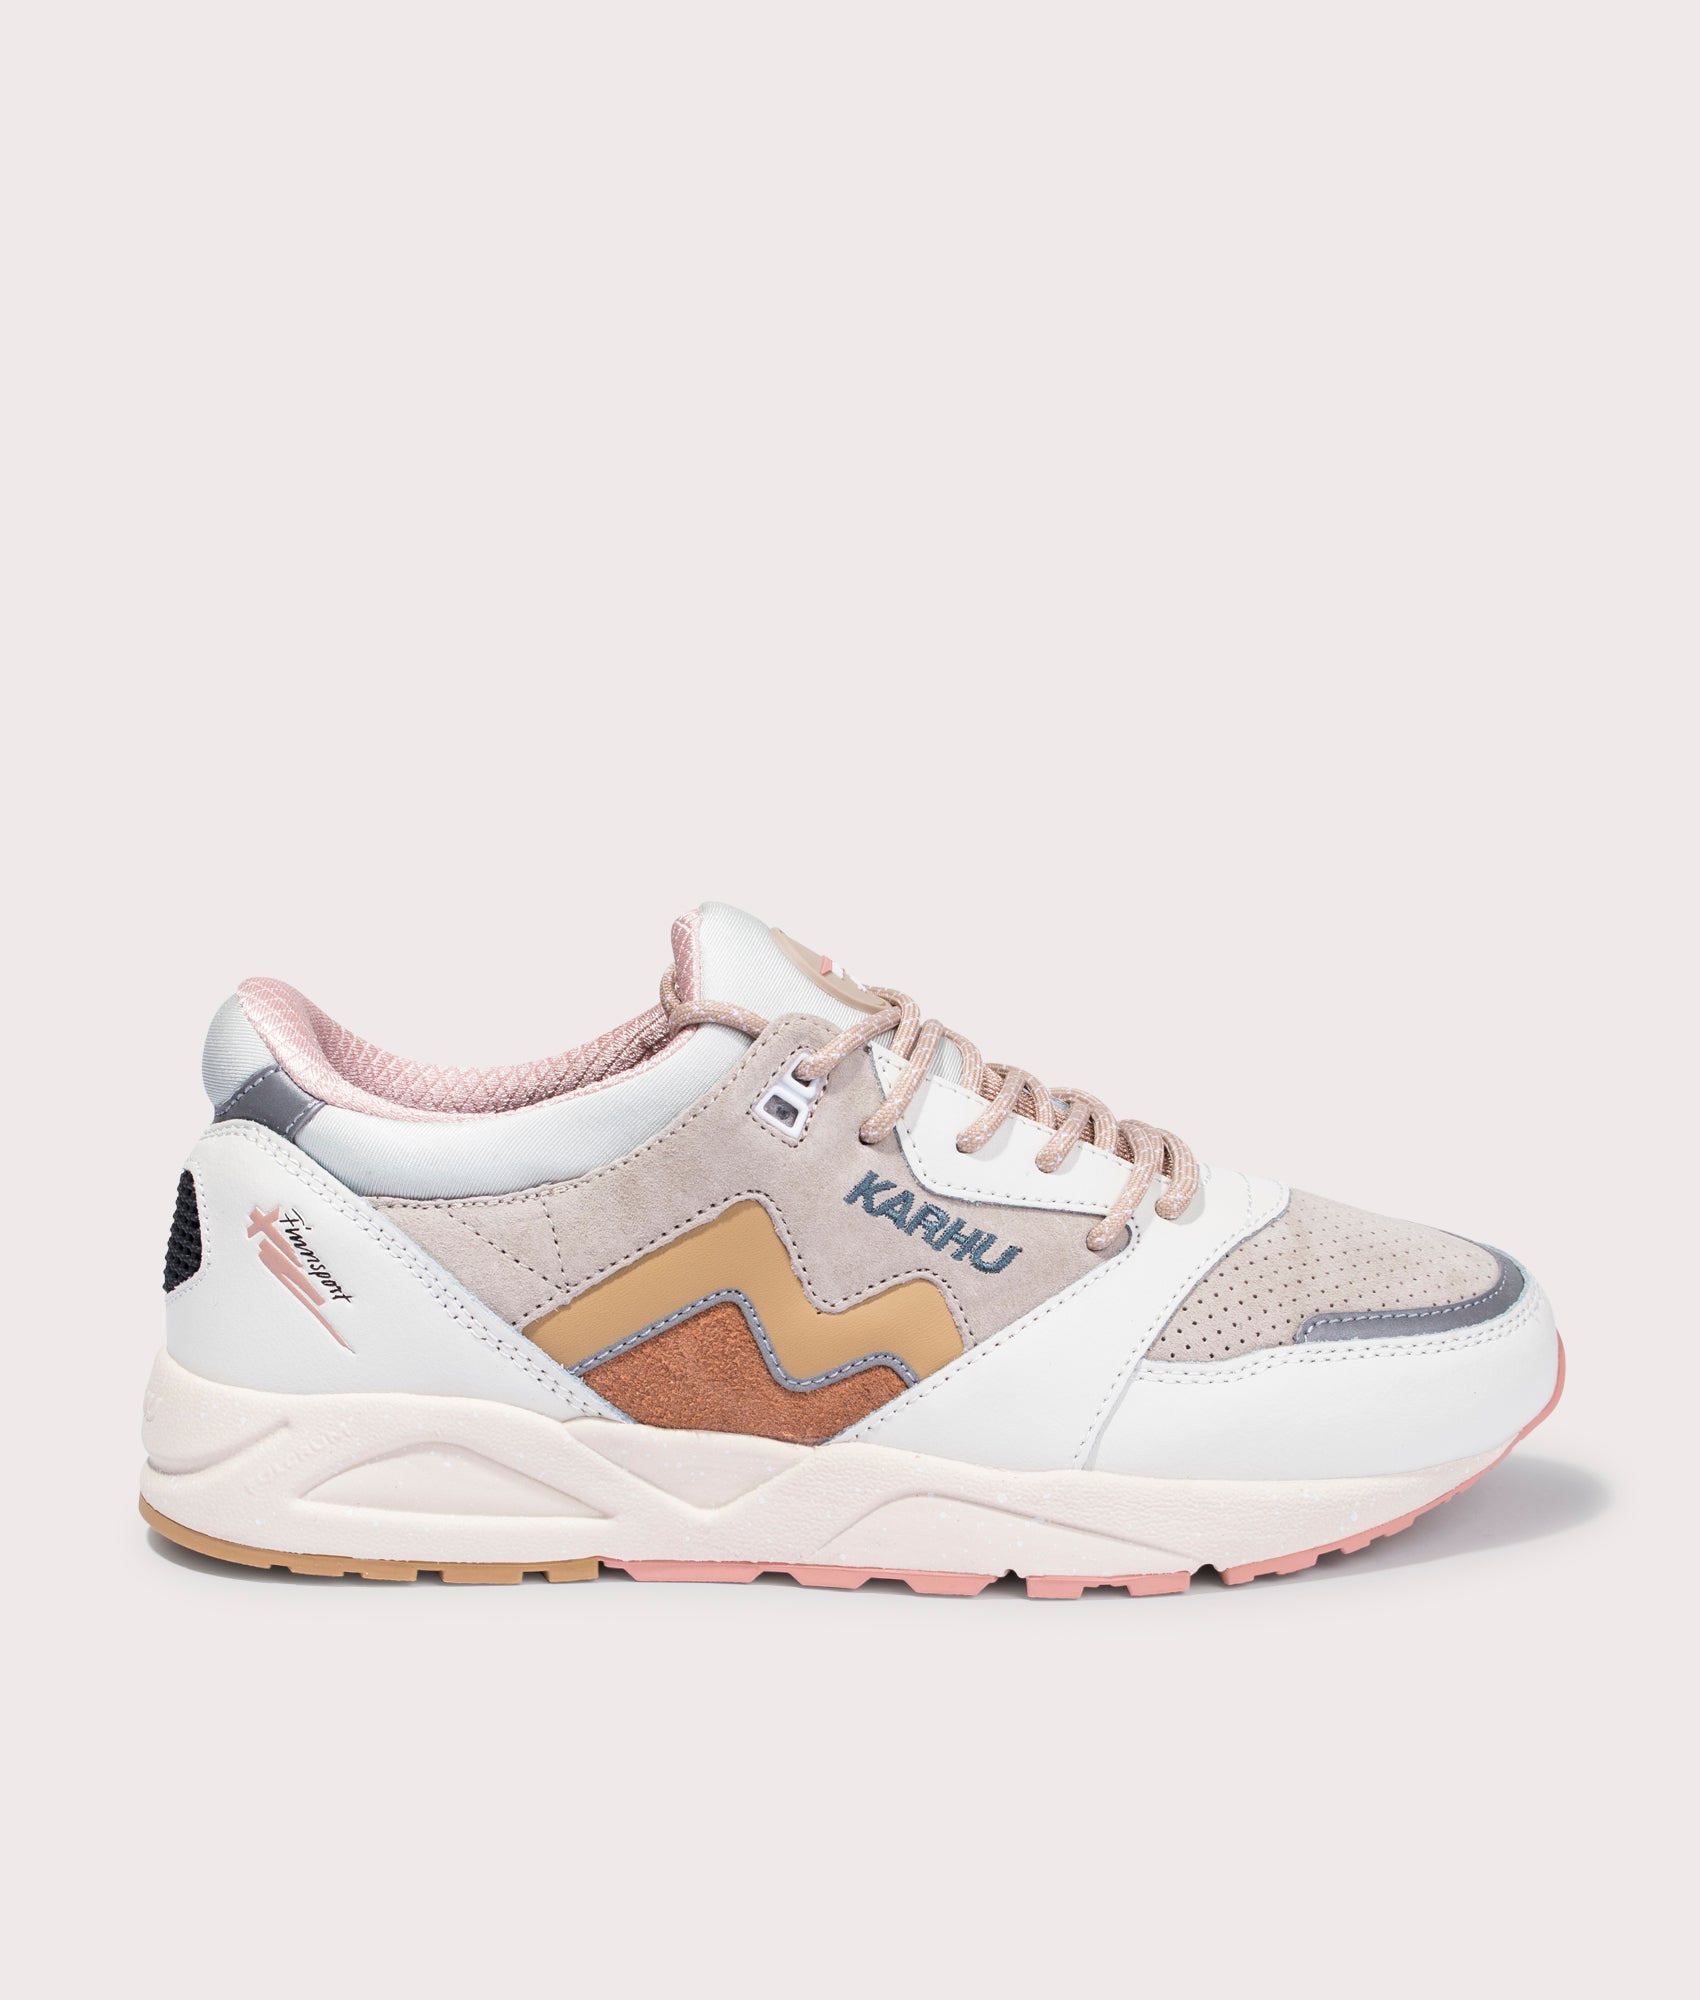 Karhu Mens Aria 95 Sneakers - Colour: Lilly White/Curry - Size: 8